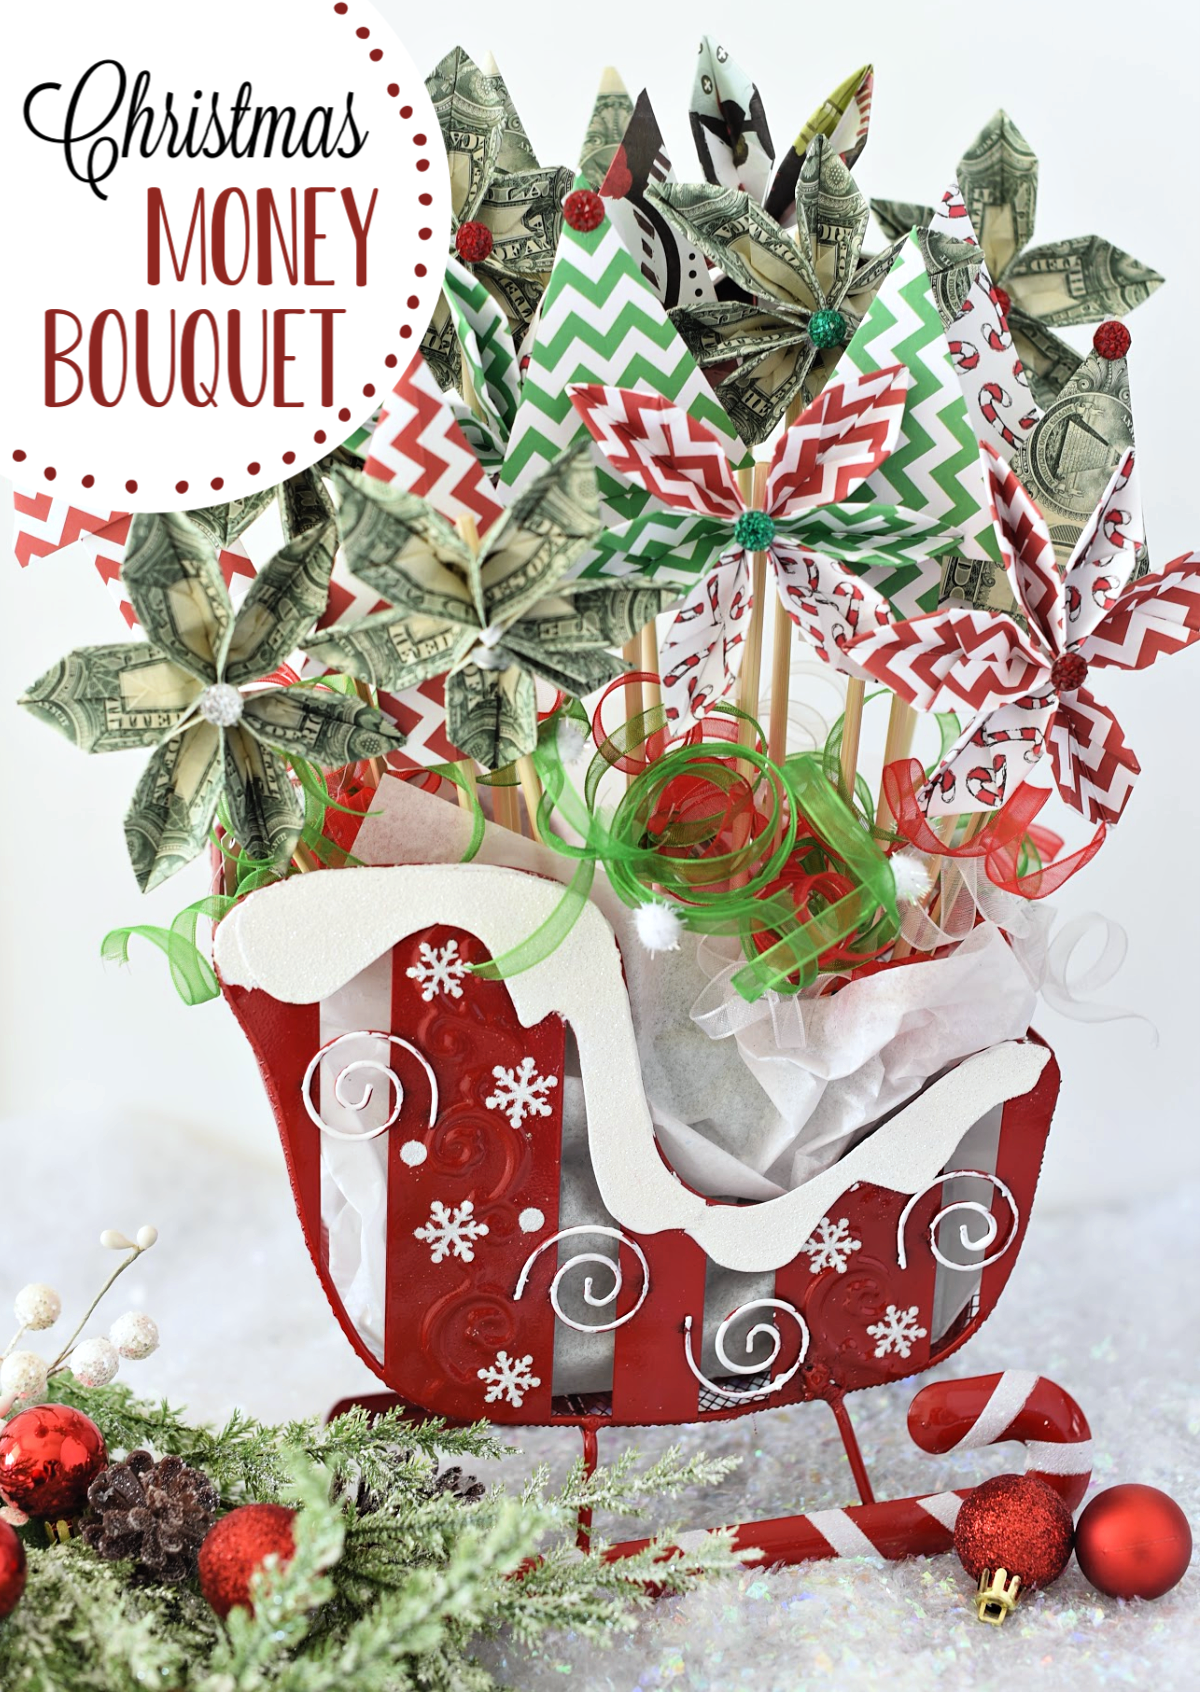 Christmas Money Bouquet makes the perfect Christmas gift! Such a fun and simple project, it makes giving money fun. #gifts #fungiftideas #funwaytogivemoney